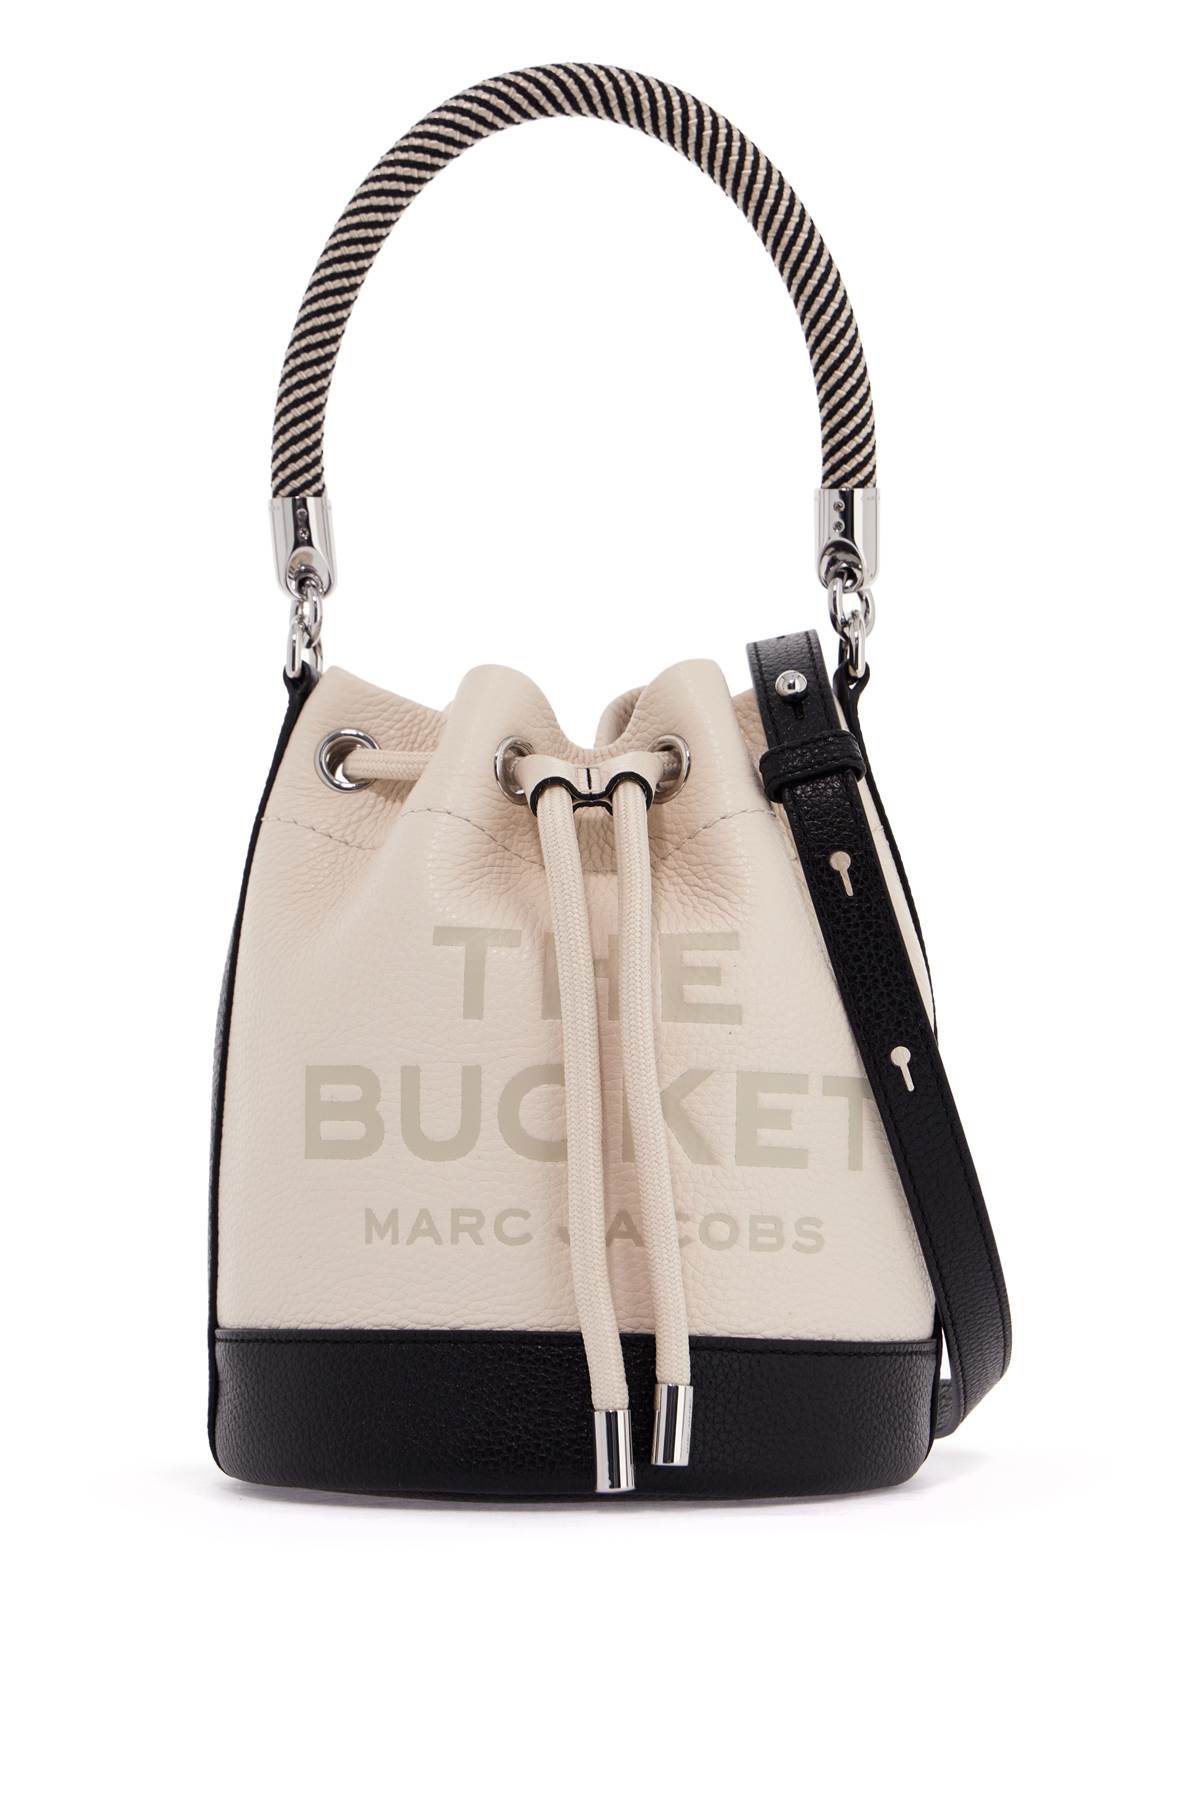 The Colorblock Leather Bucket Bag